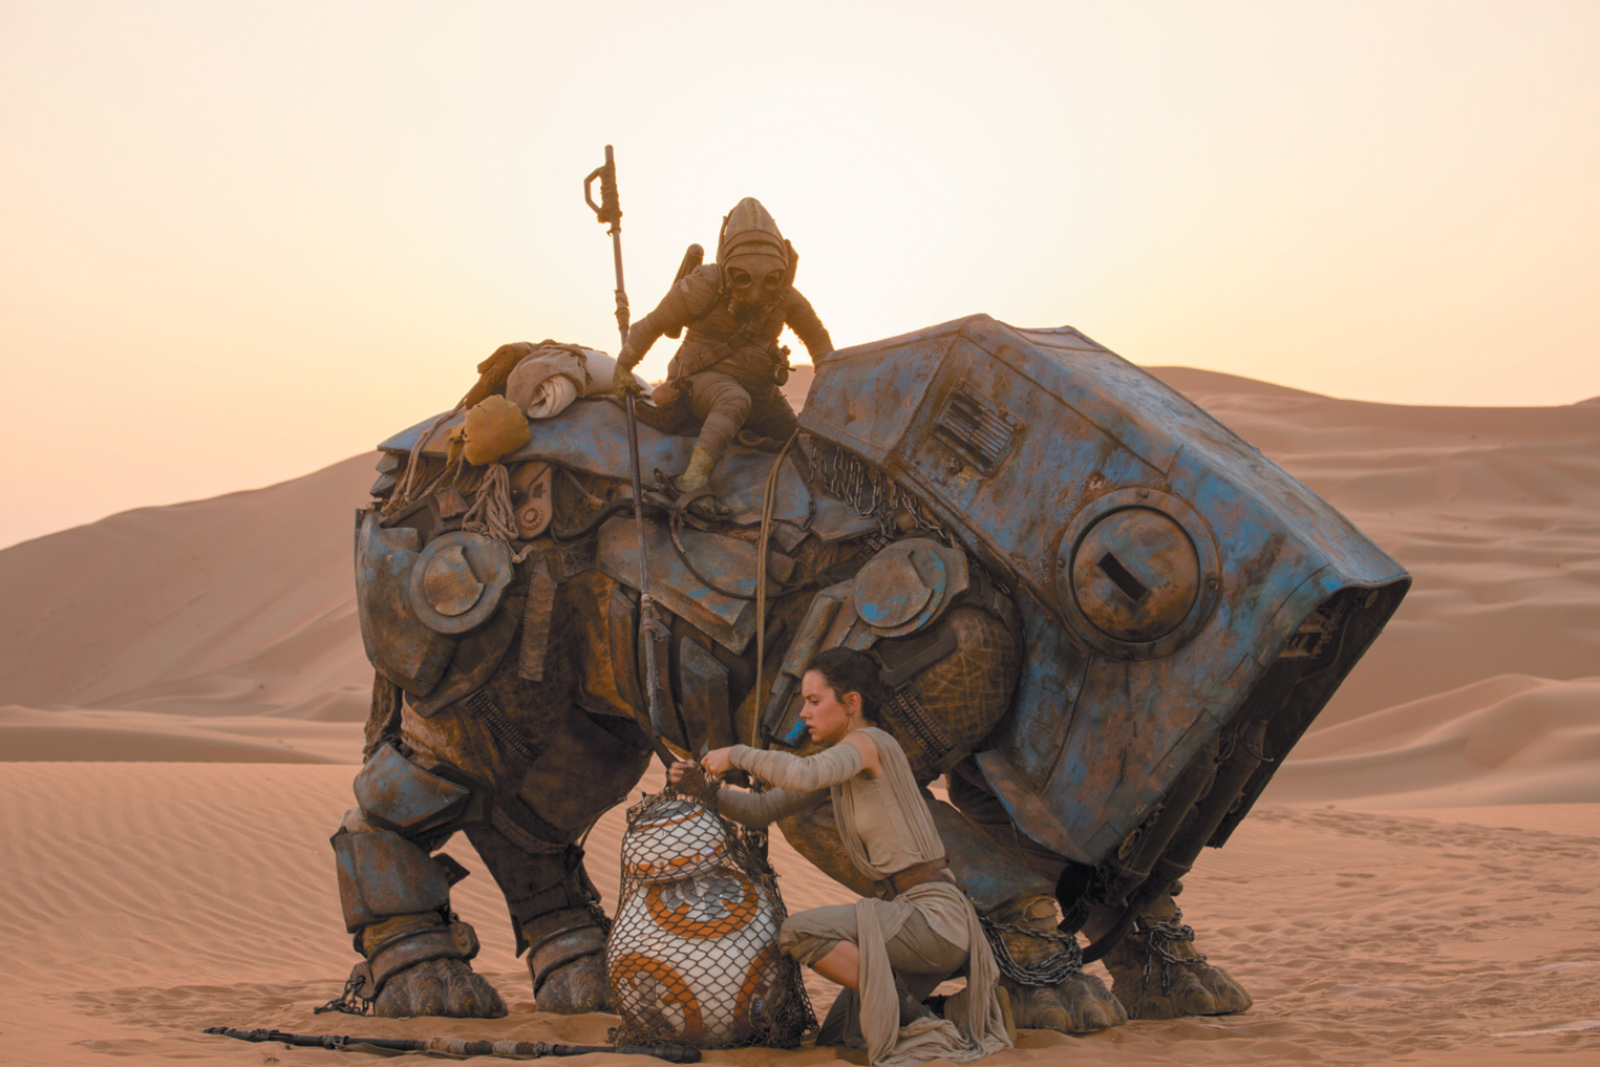 Rey (Daisy Ridley) freeing the droid BB-8 from the net of the scavenger Teedo and his semi-mechanical Luggabeast in Star Wars: The Force Awakens